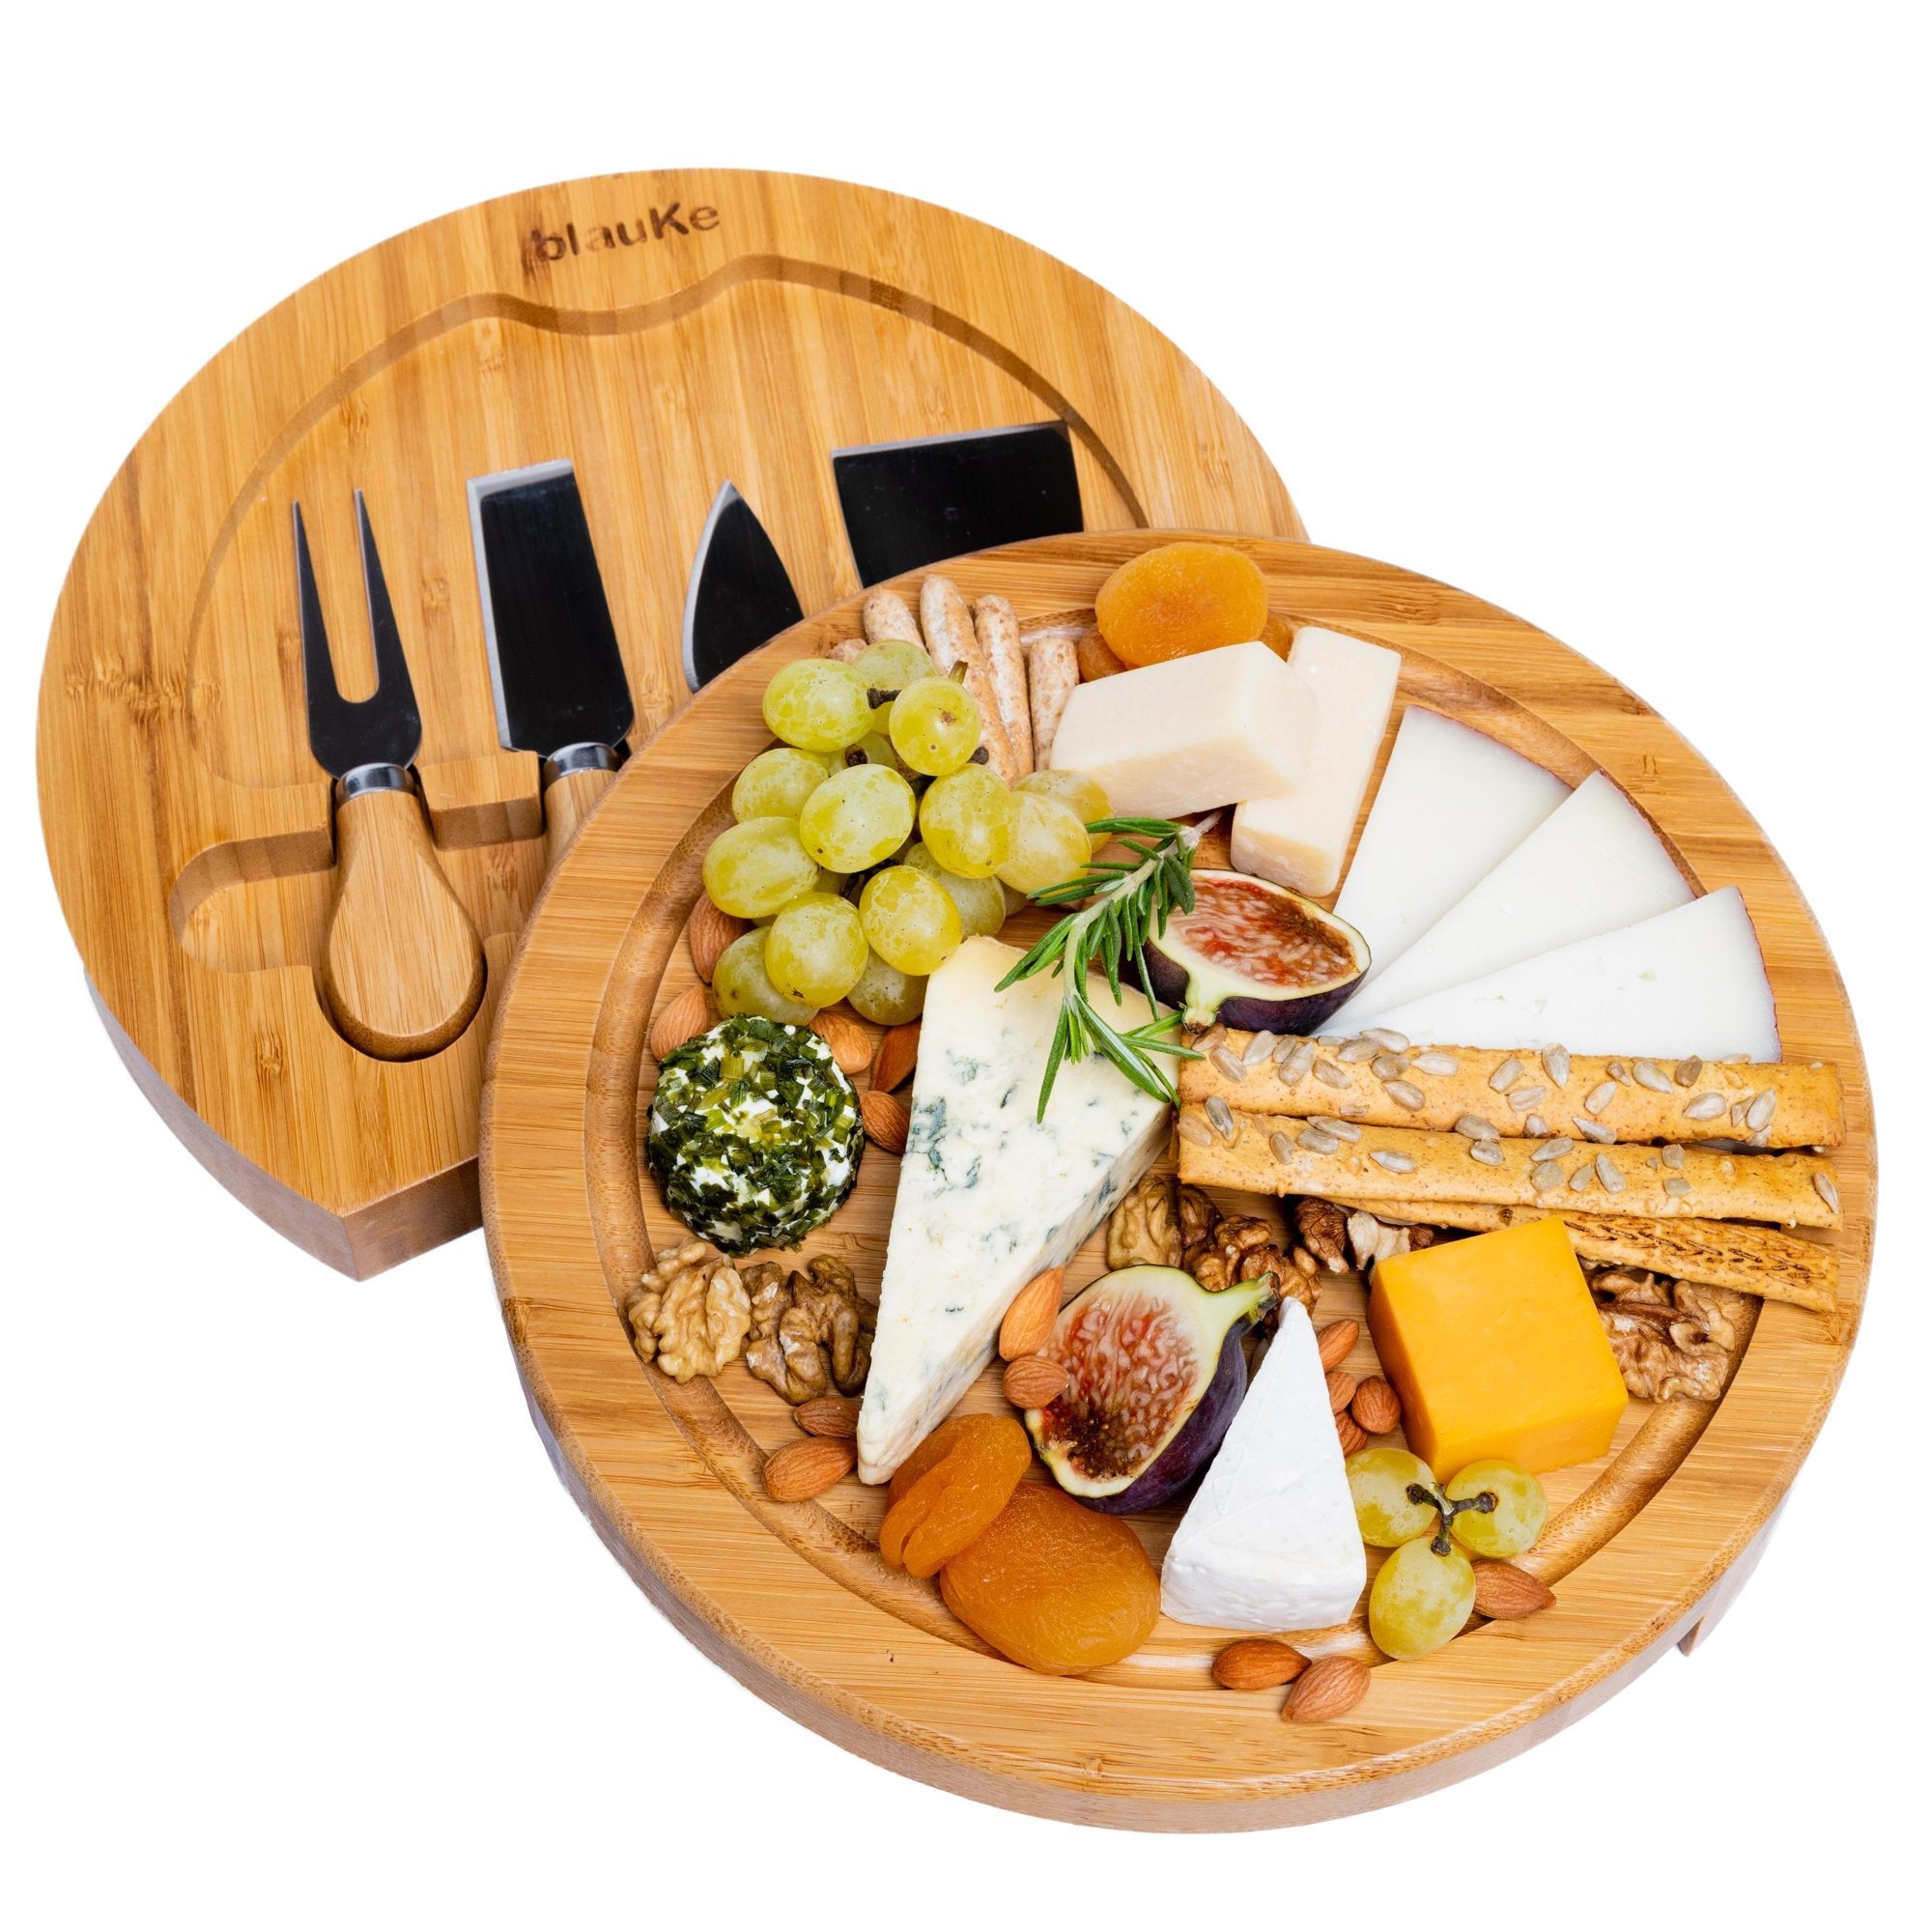 Bamboo Cheese Board and Knife Set - 10 Inch